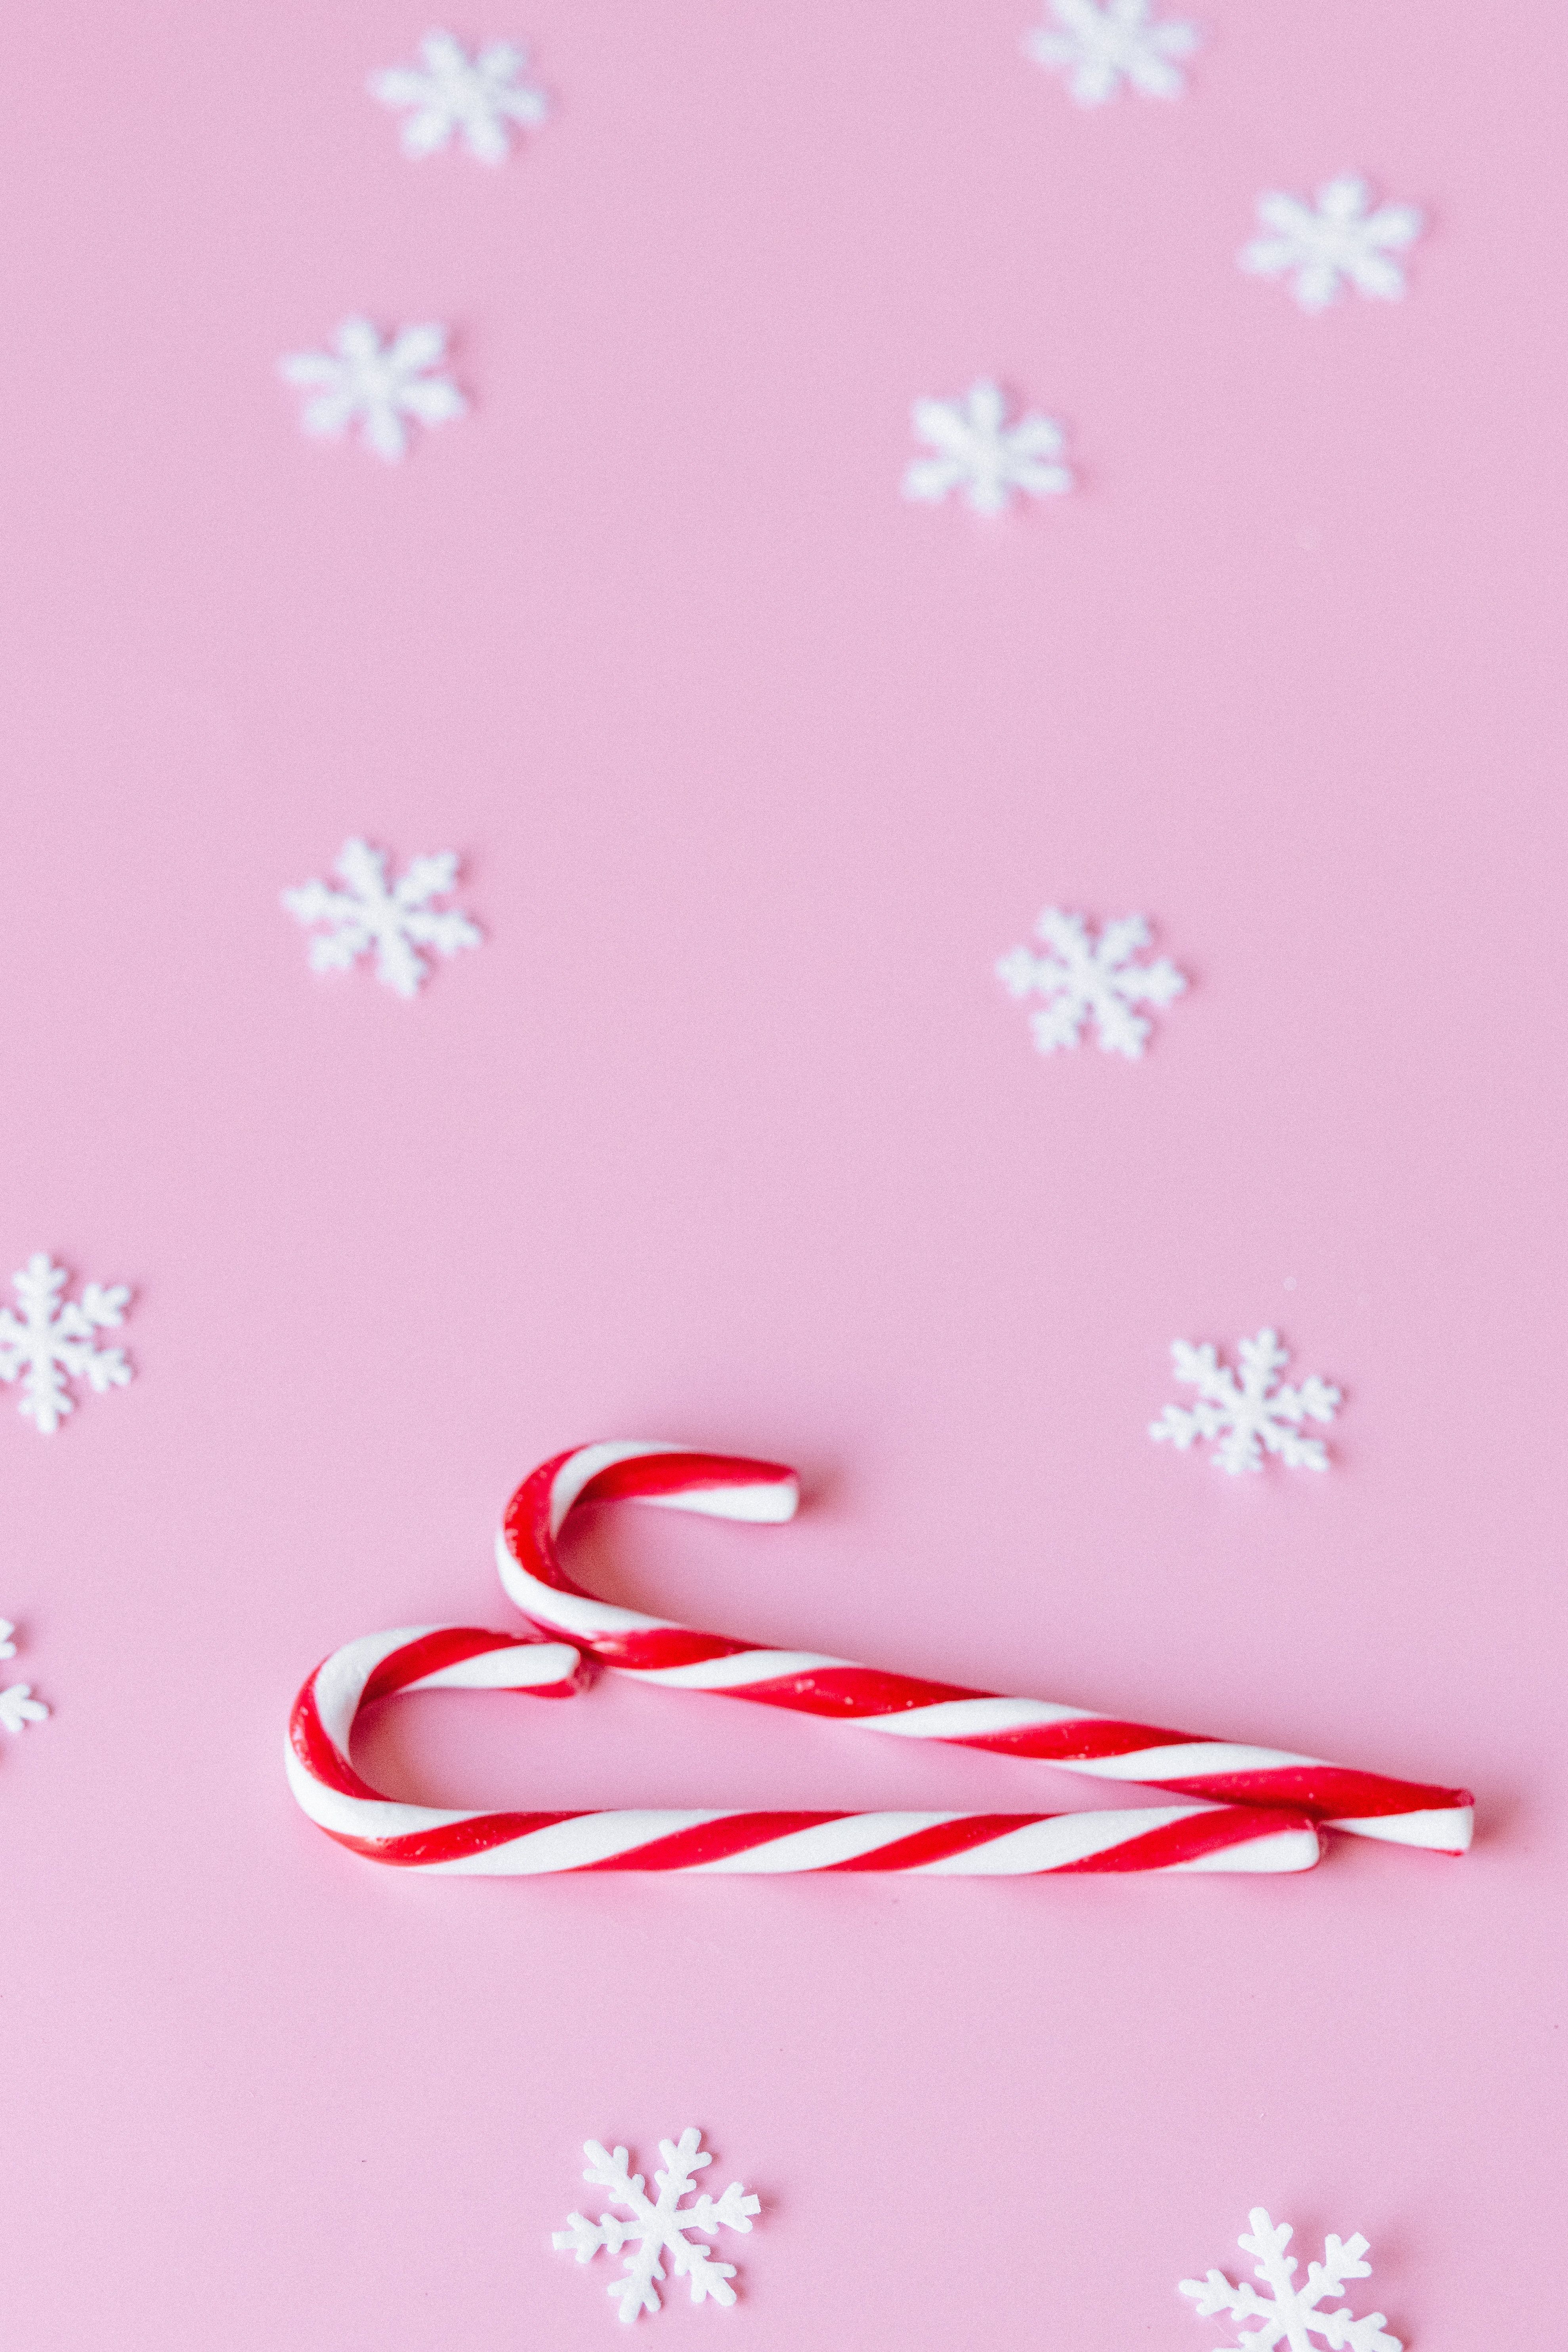 Candy Canes Photo, Download The BEST Free Candy Canes & HD Image